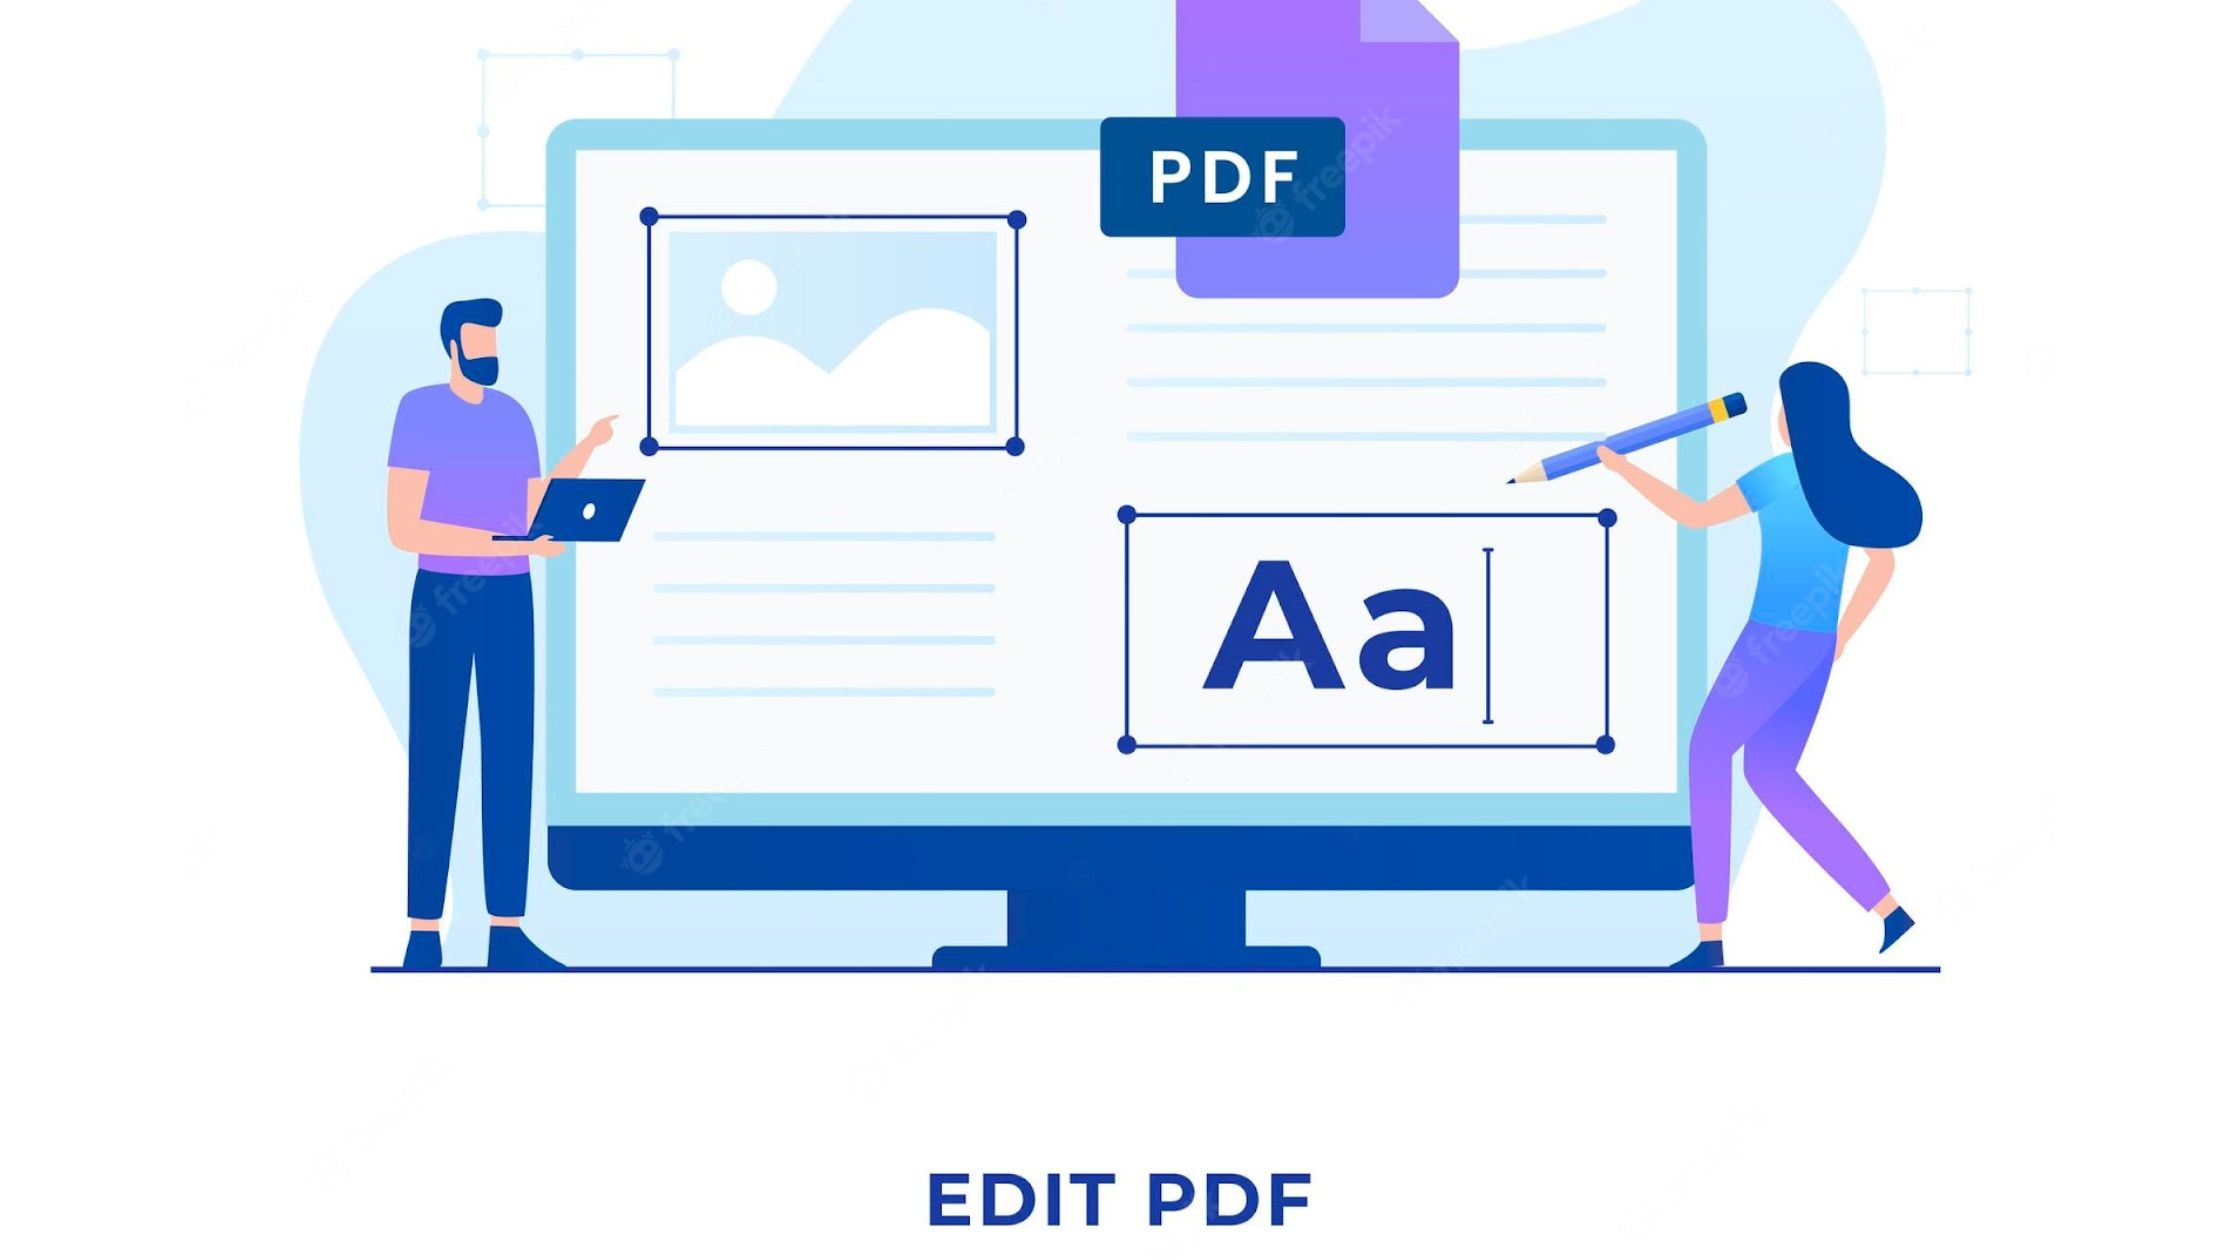 Who Else Wants To Know How To Use a PDF Editor